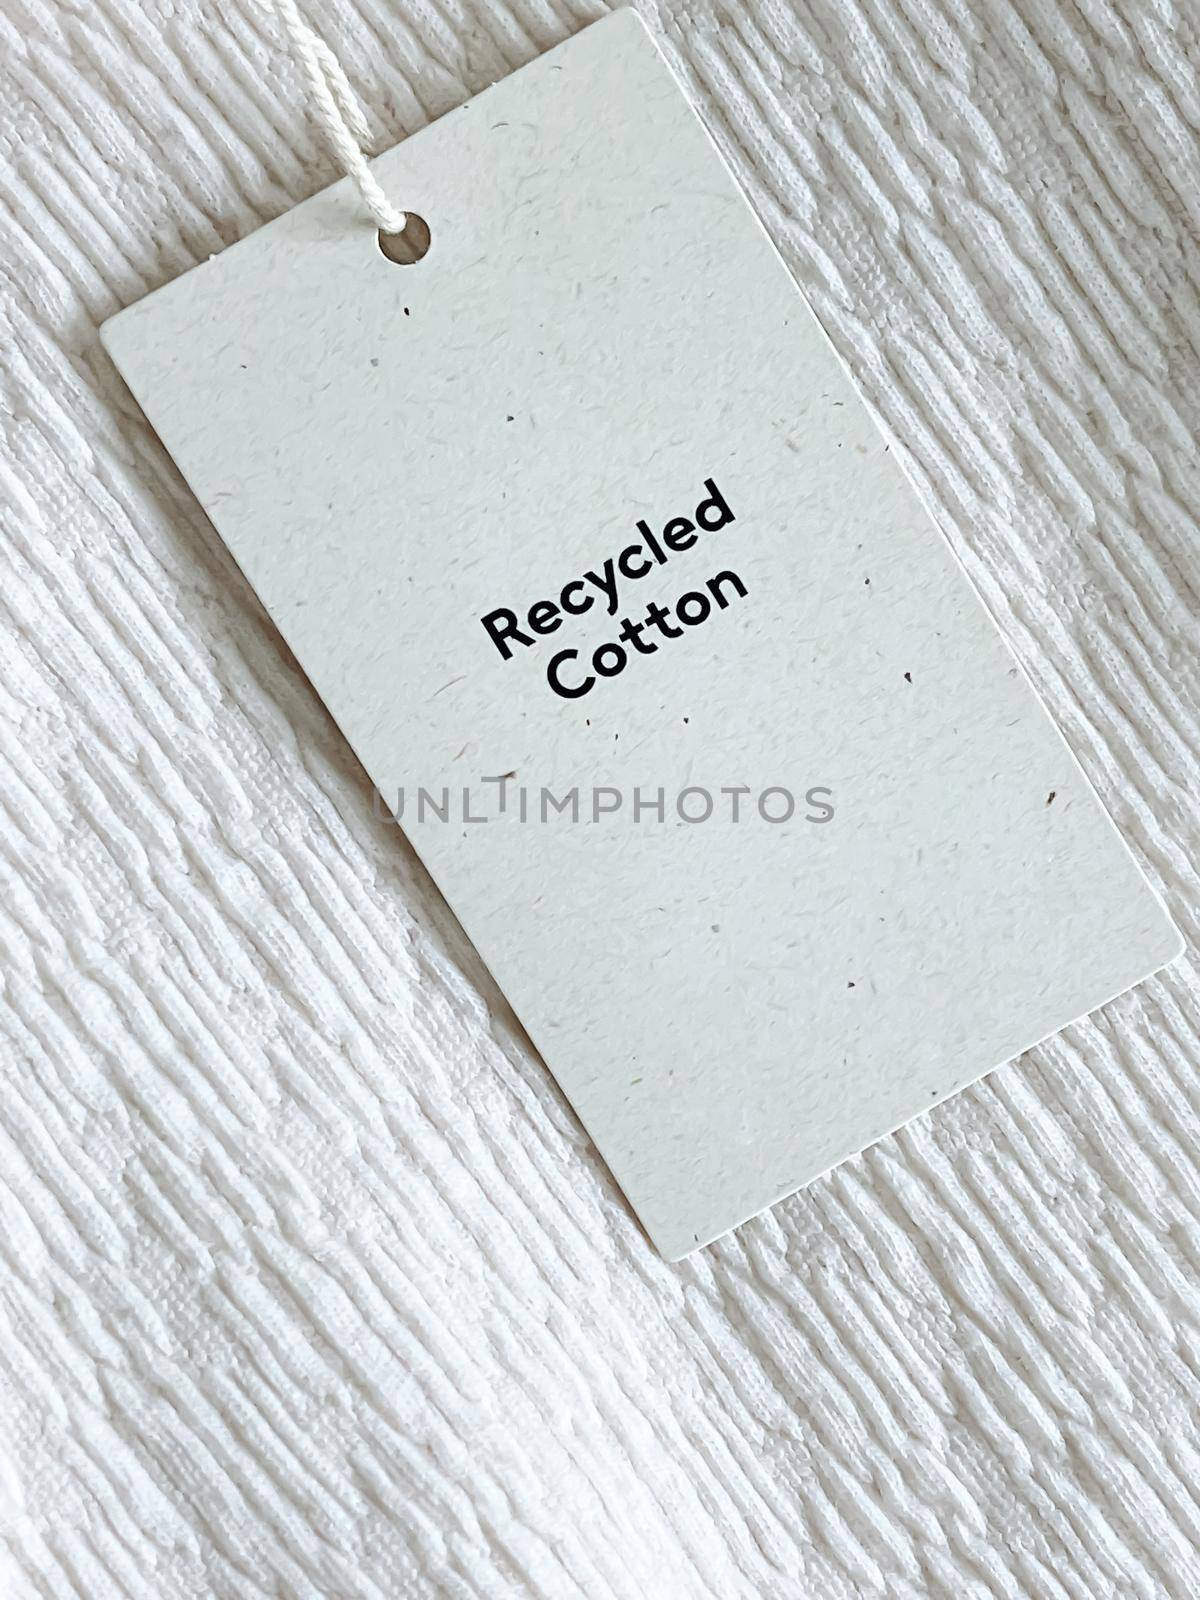 Recycled cotton fashion label tag, sale price card on luxury fabric background, shopping and retail concept